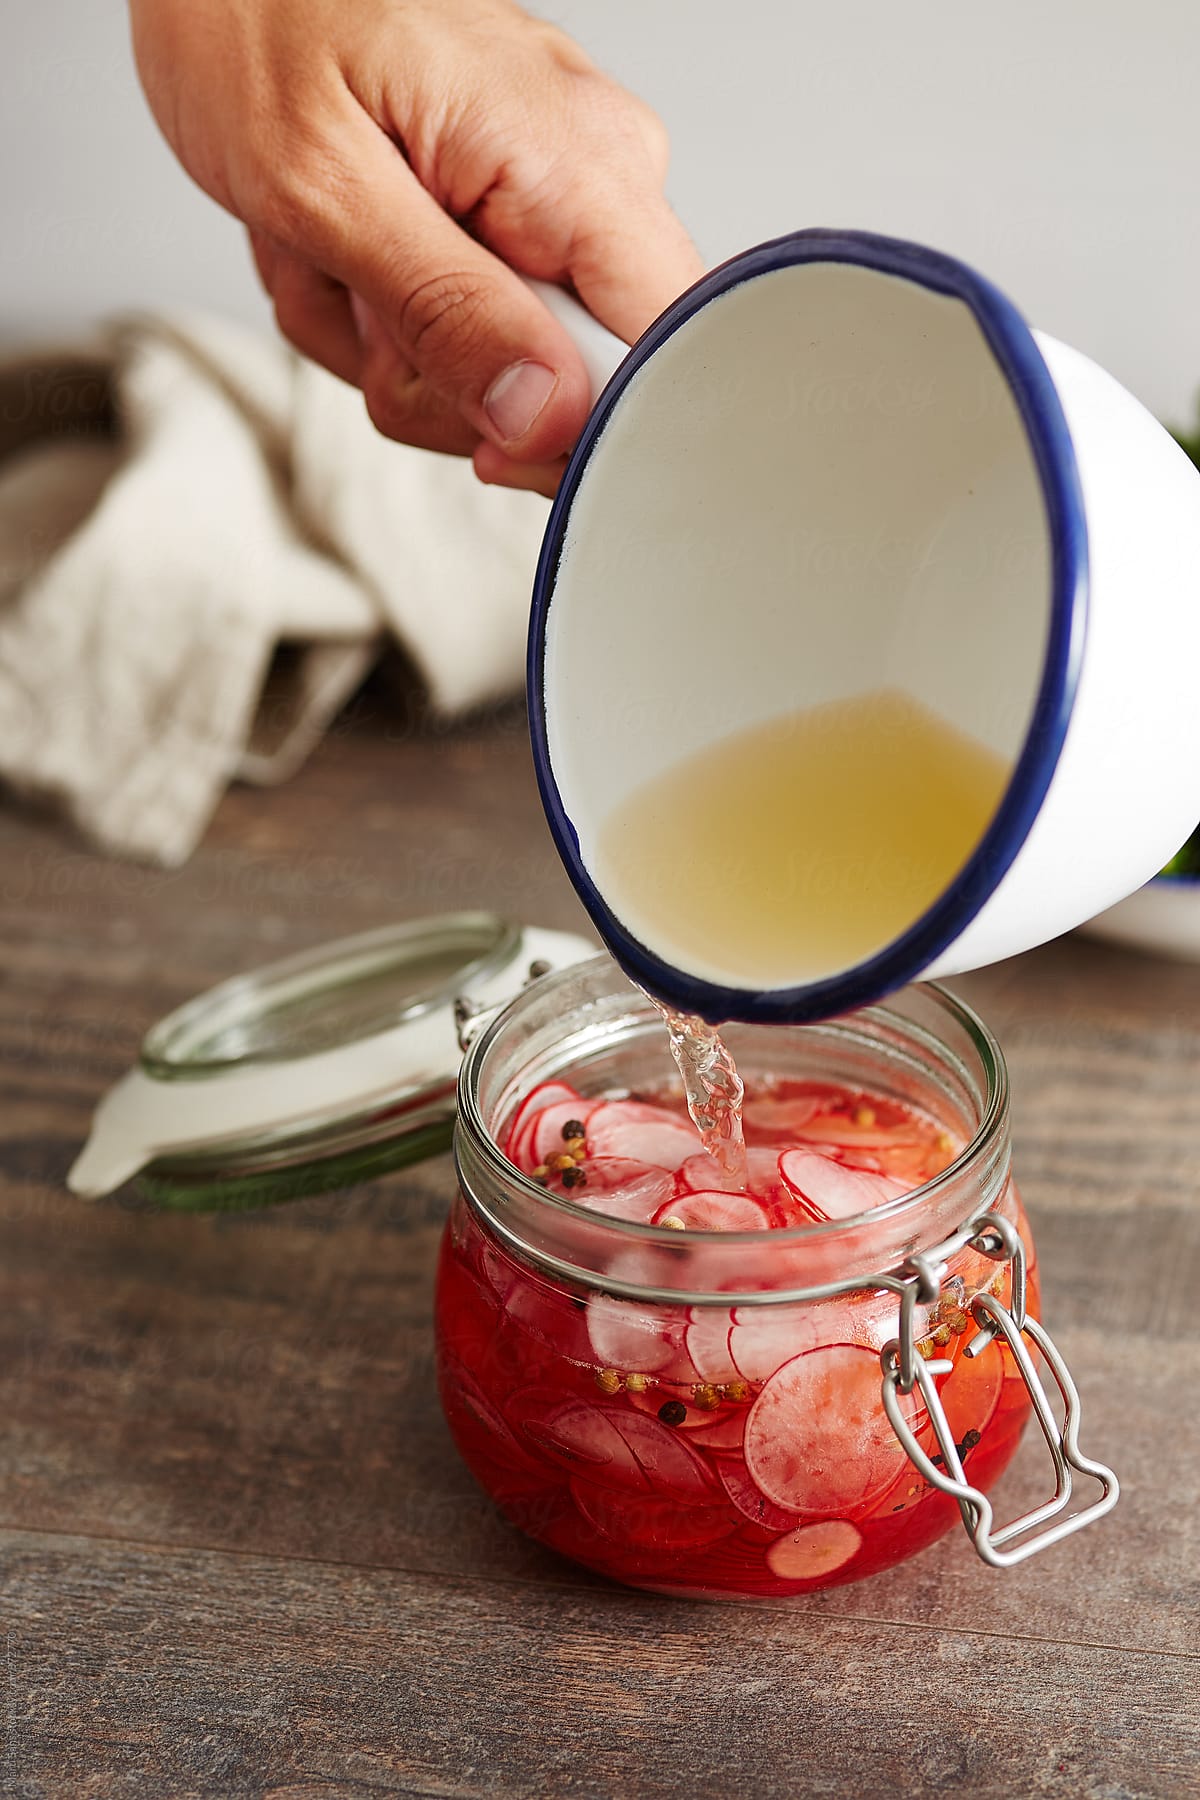 Hand pouring liquid in jar with sliced radish